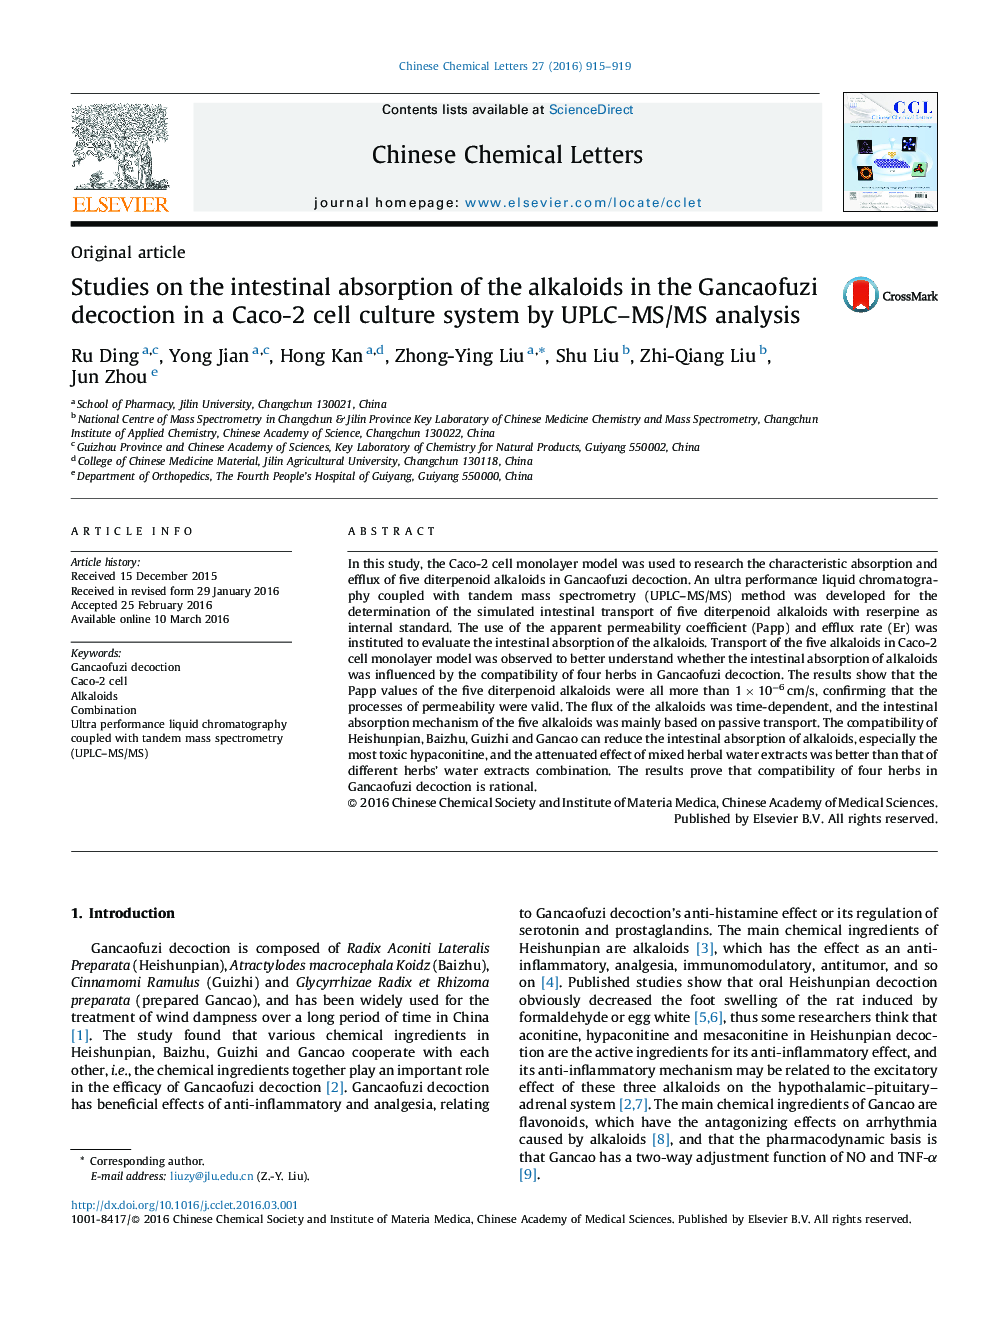 Studies on the intestinal absorption of the alkaloids in the Gancaofuzi decoction in a Caco-2 cell culture system by UPLC–MS/MS analysis